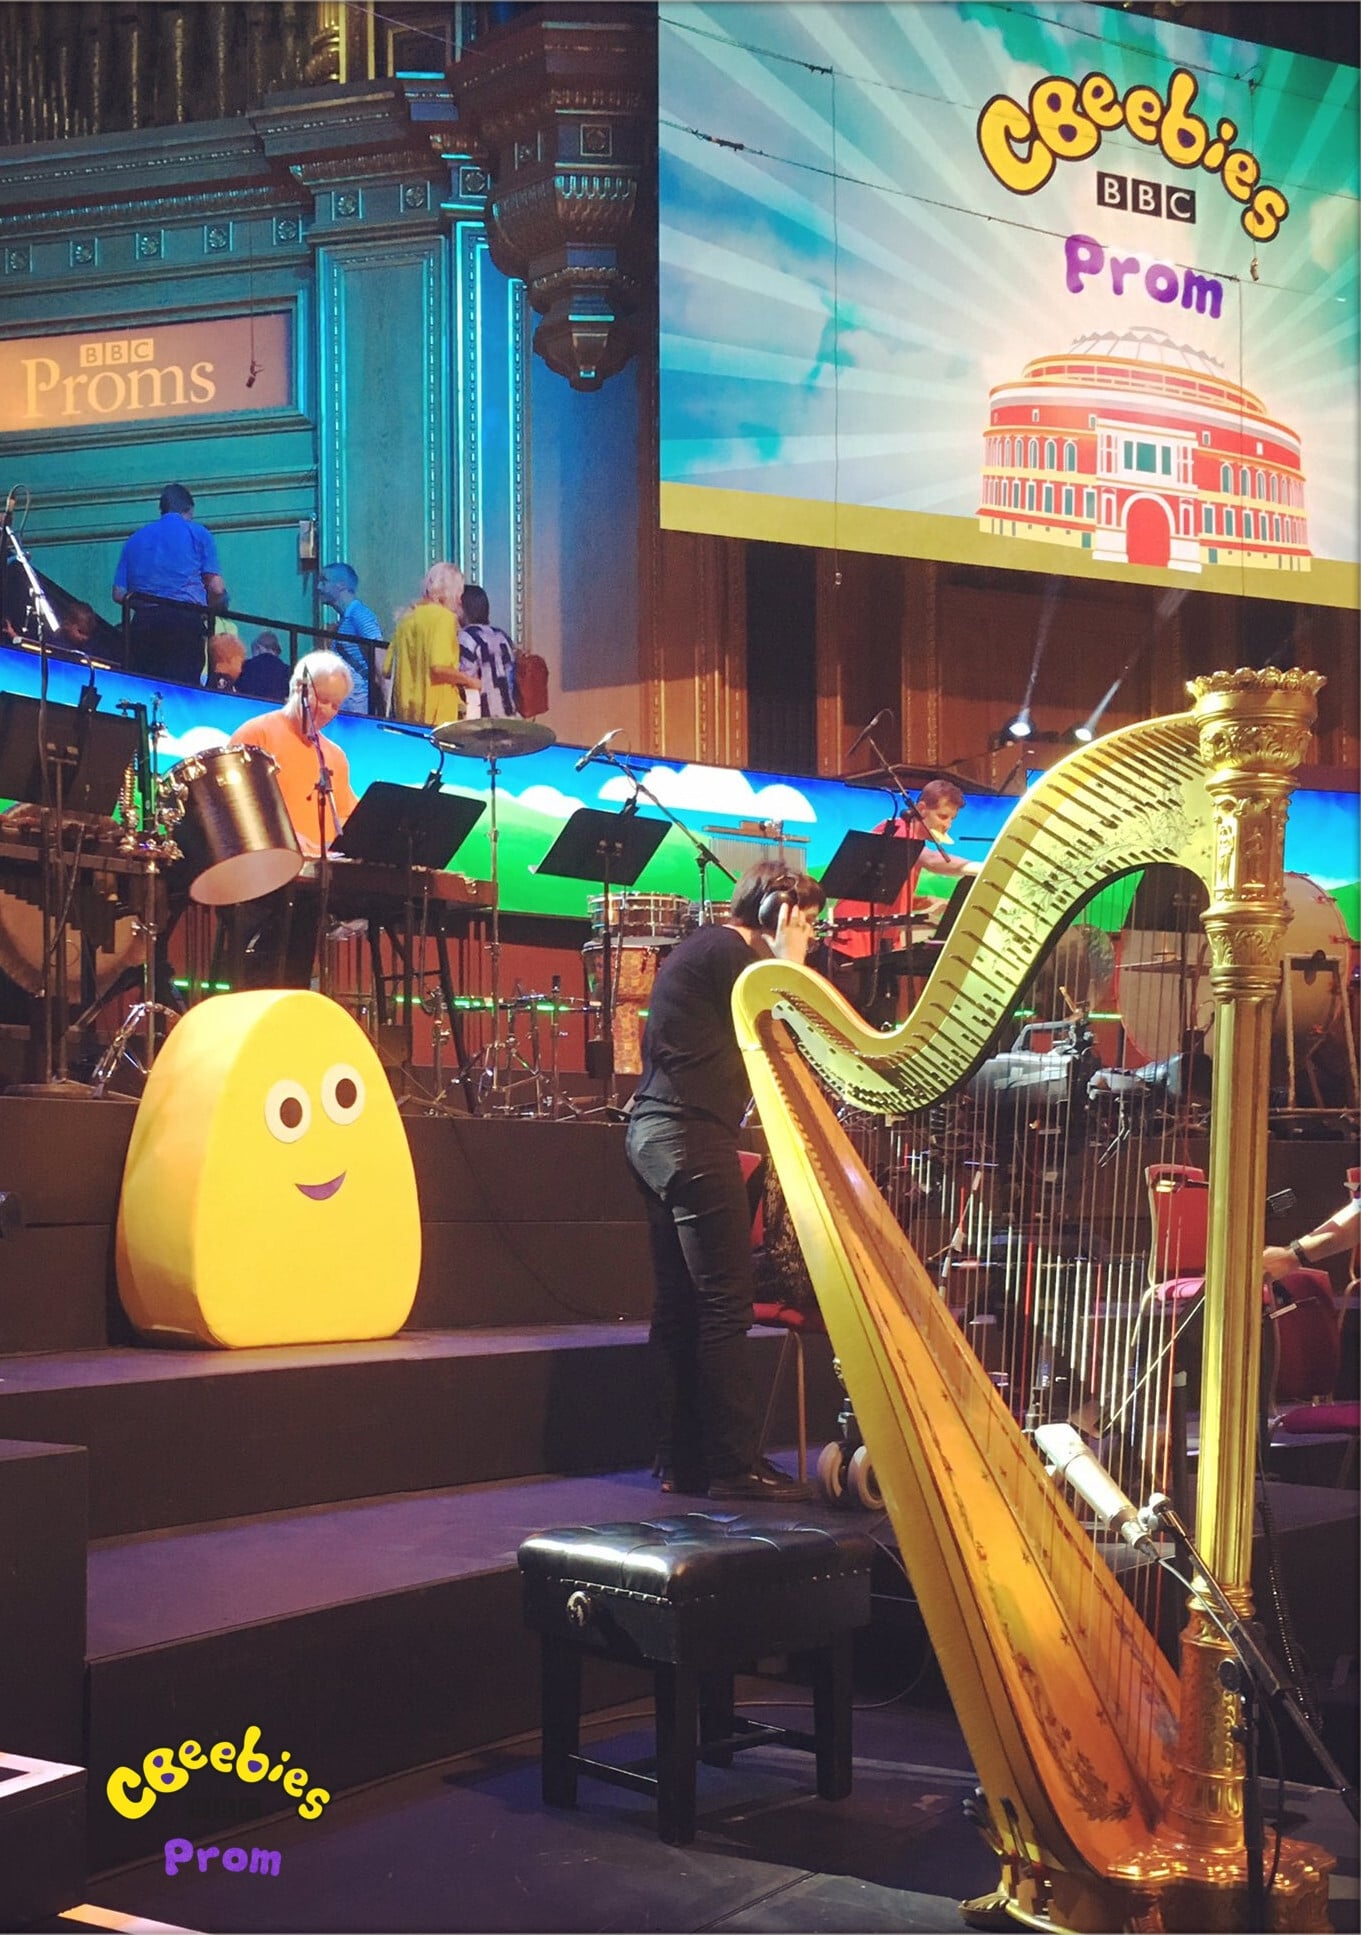 CBeebies Prom: A Musical Journey